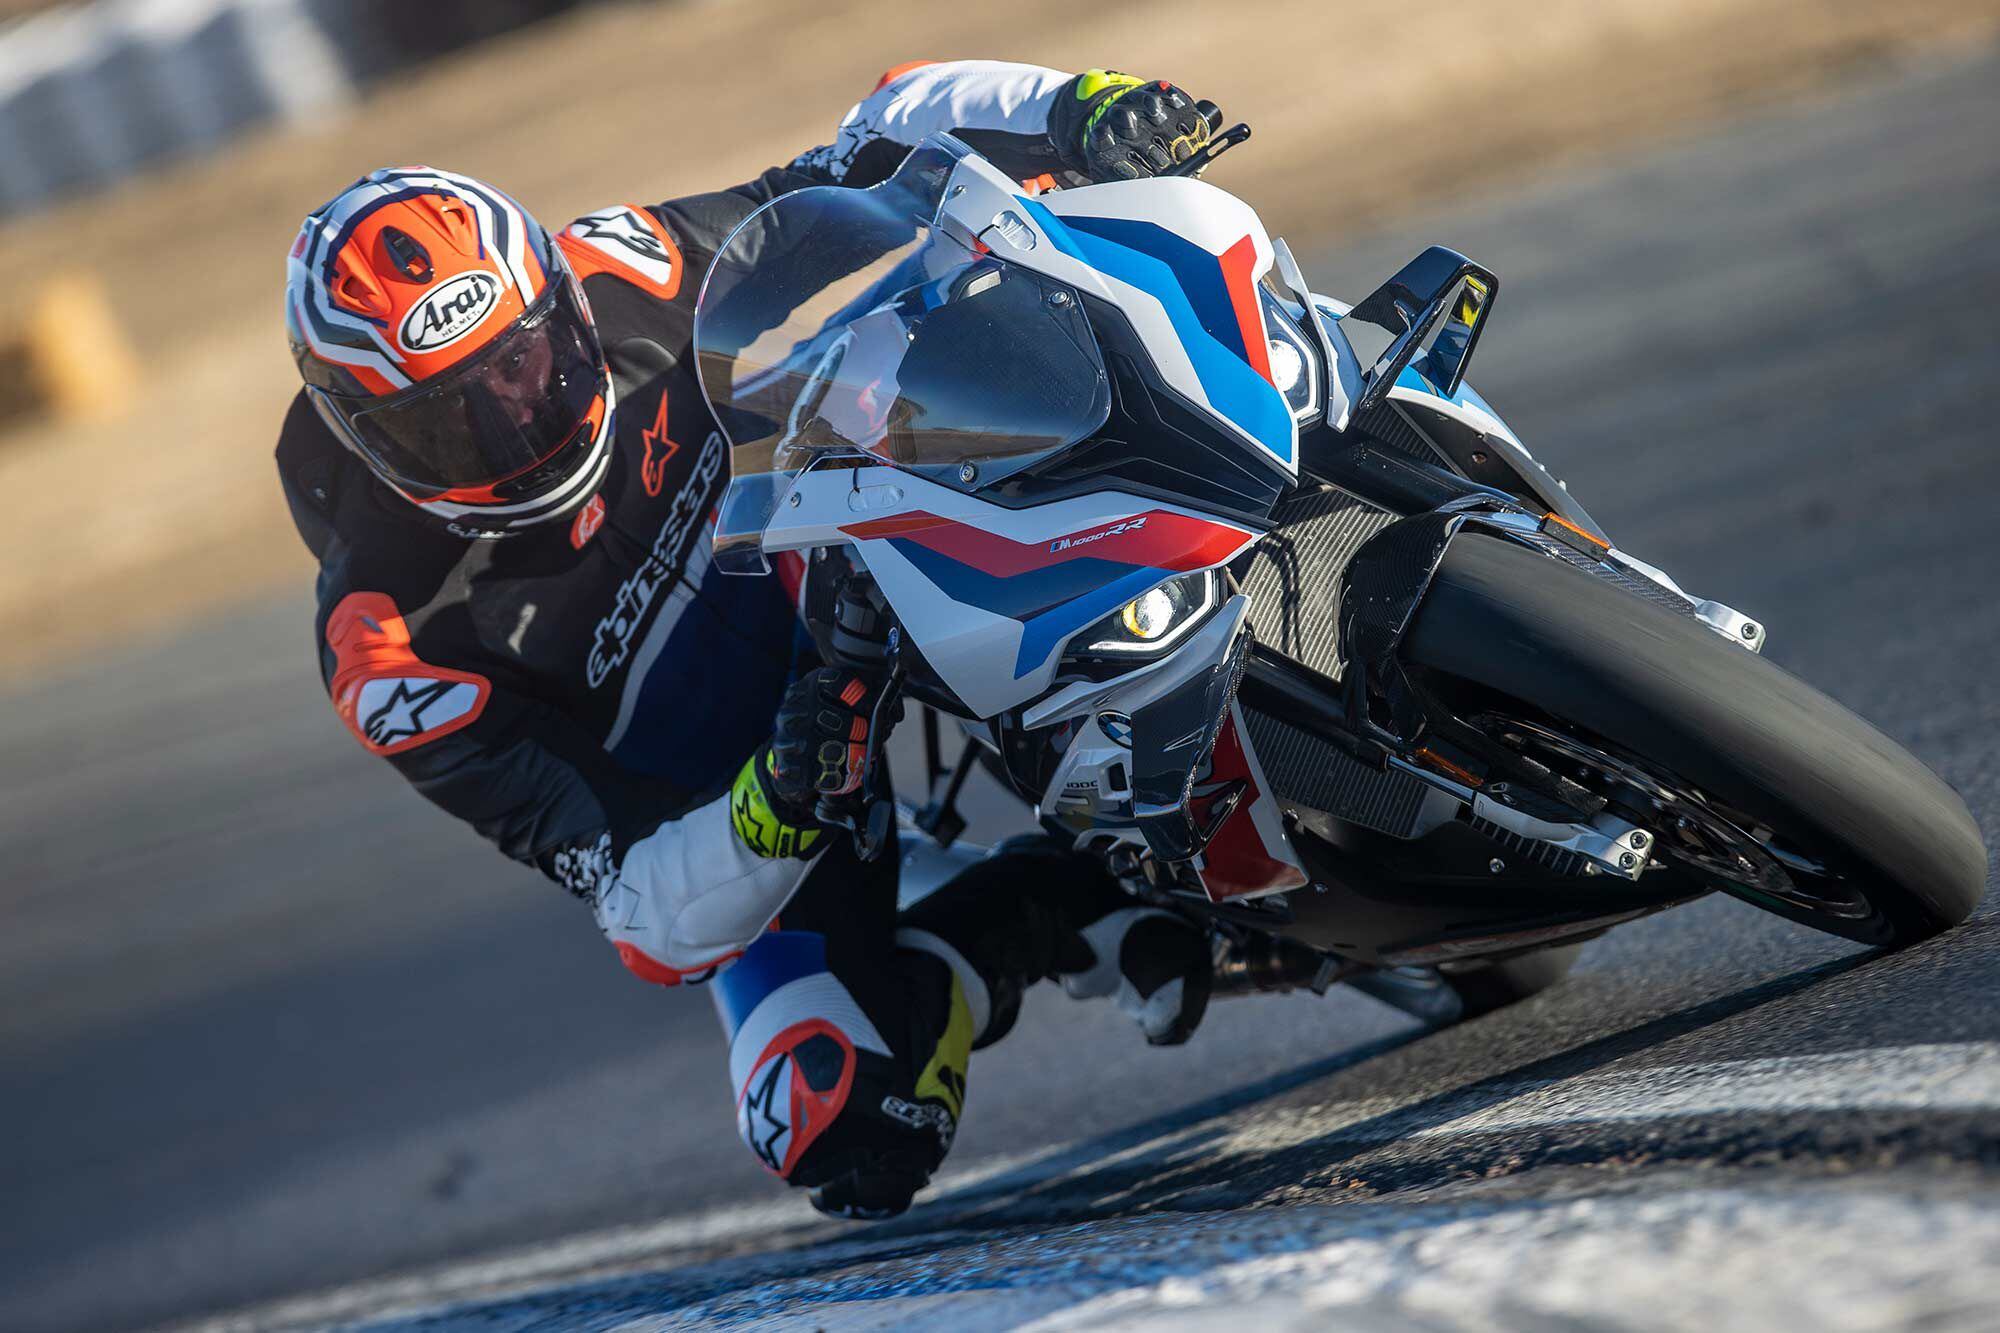 The M 1000 RR is the lightest bike of this year’s test at 403 pounds without fuel, which is best demonstrated by its precise steering and nimbleness on track.